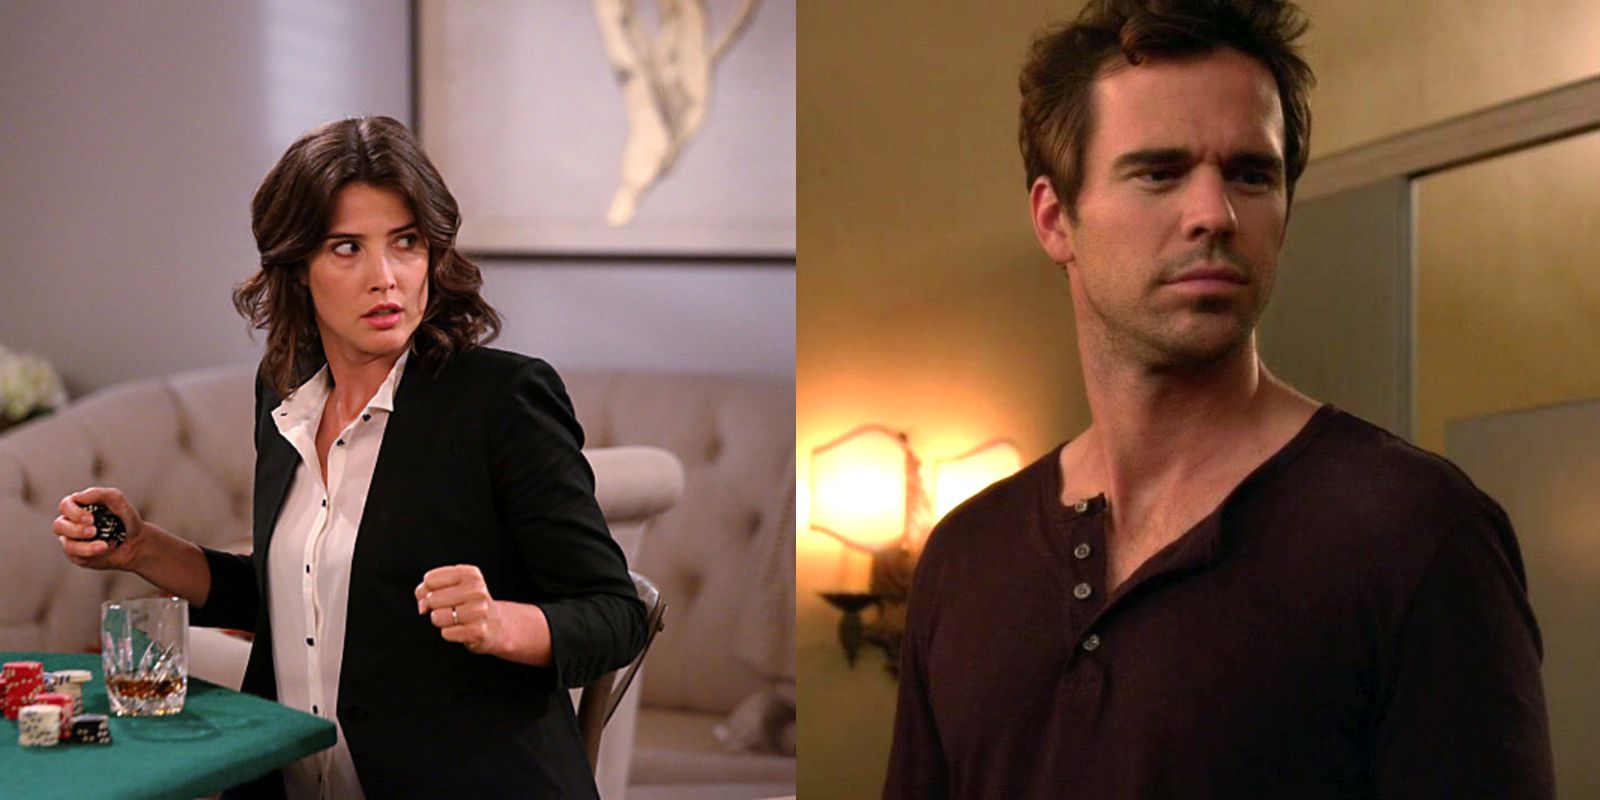 Robin in How I Met Your Mother and Sam in New Girl.